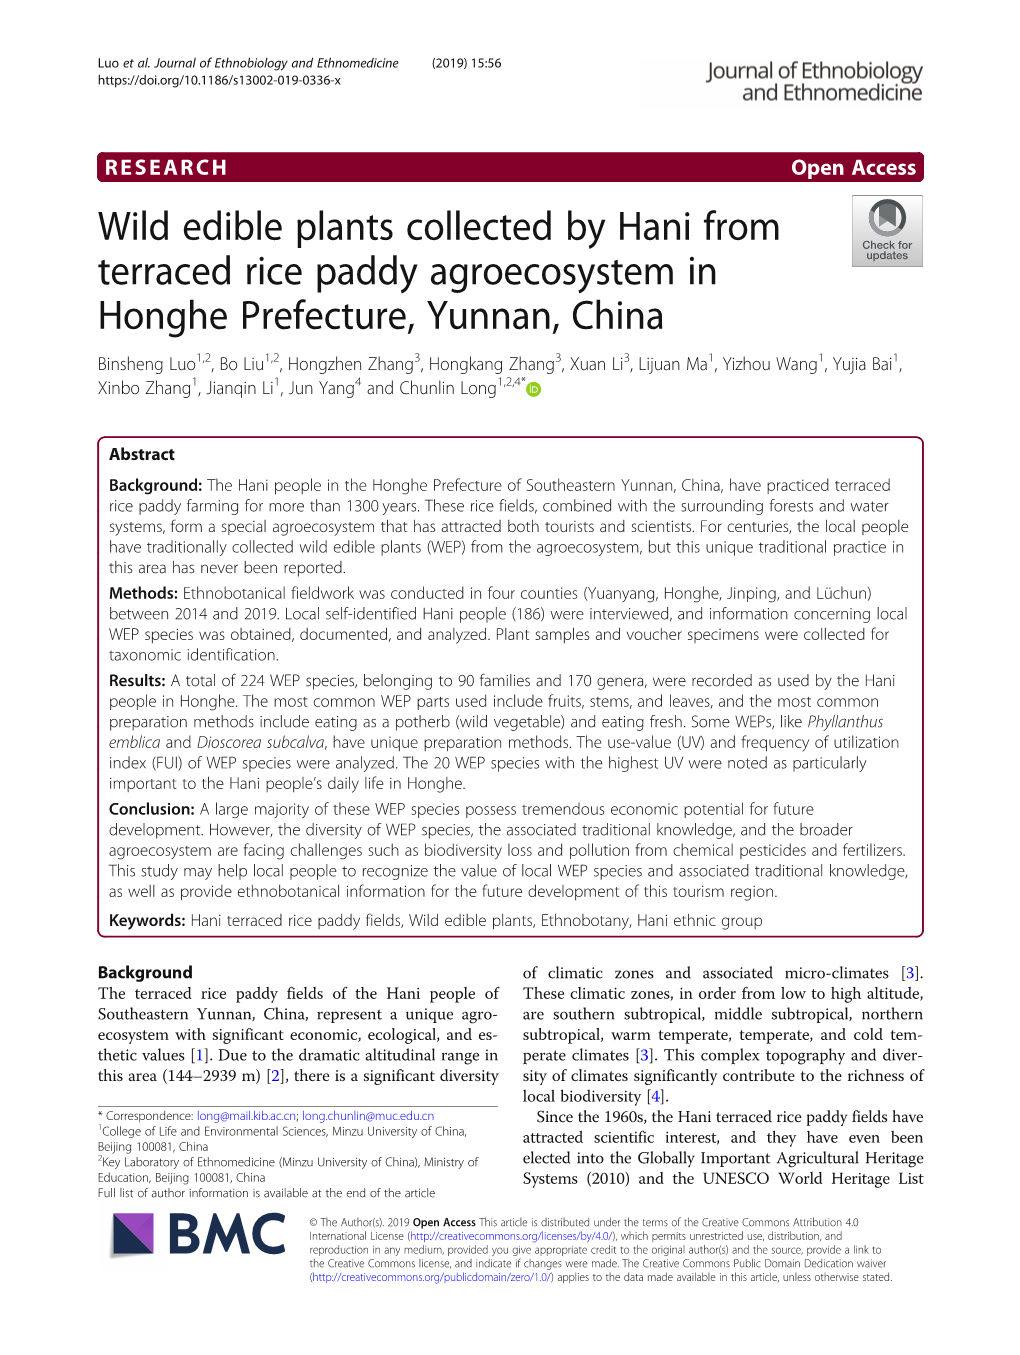 Wild Edible Plants Collected by Hani from Terraced Rice Paddy Agroecosystem in Honghe Prefecture, Yunnan, China